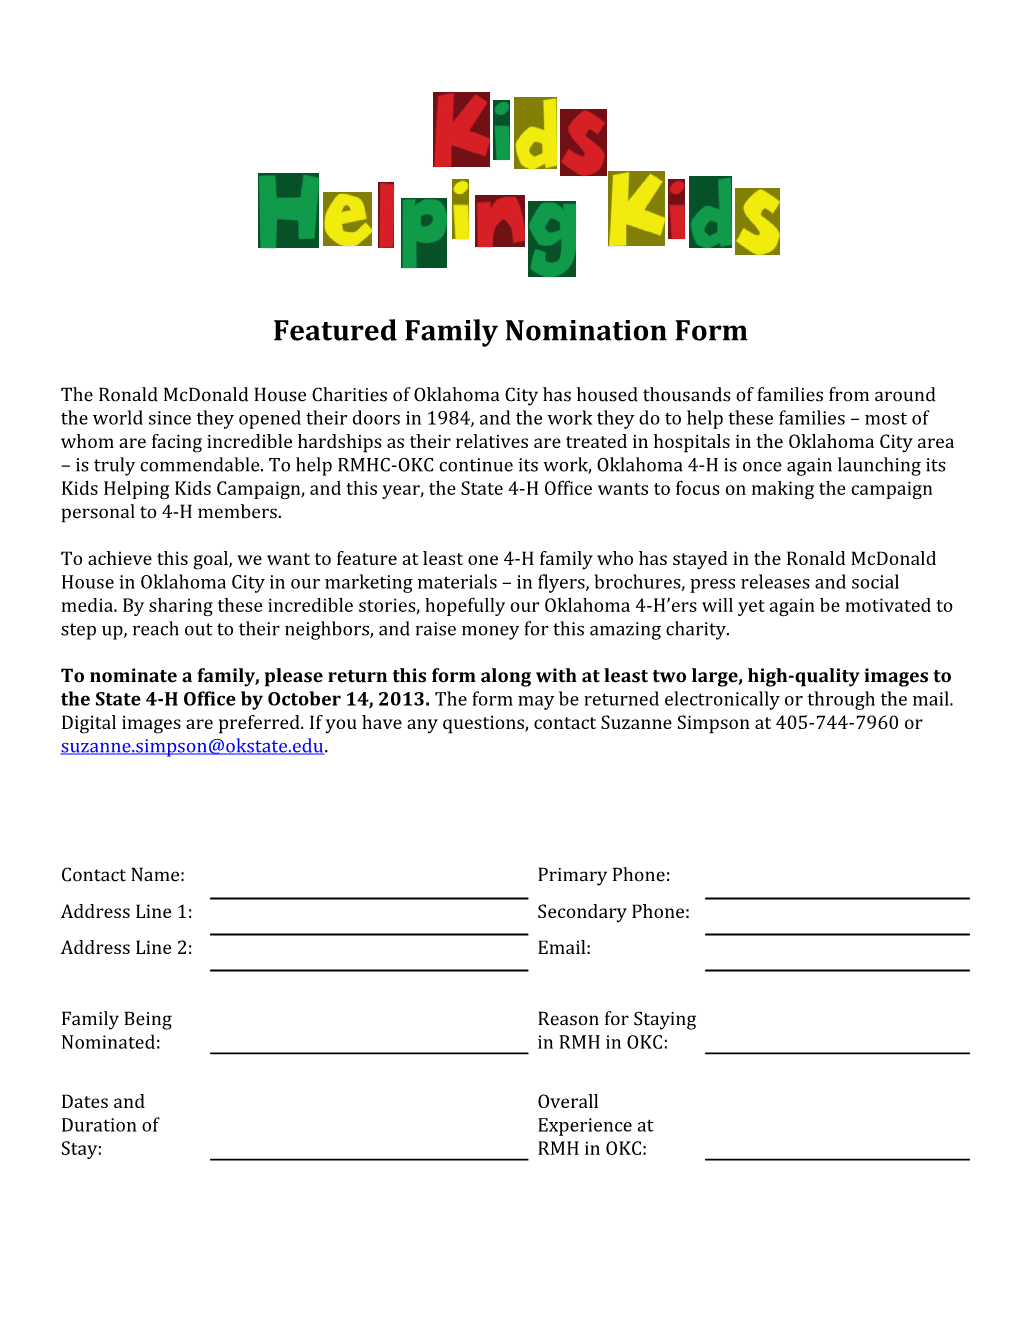 Featured Family Nomination Form